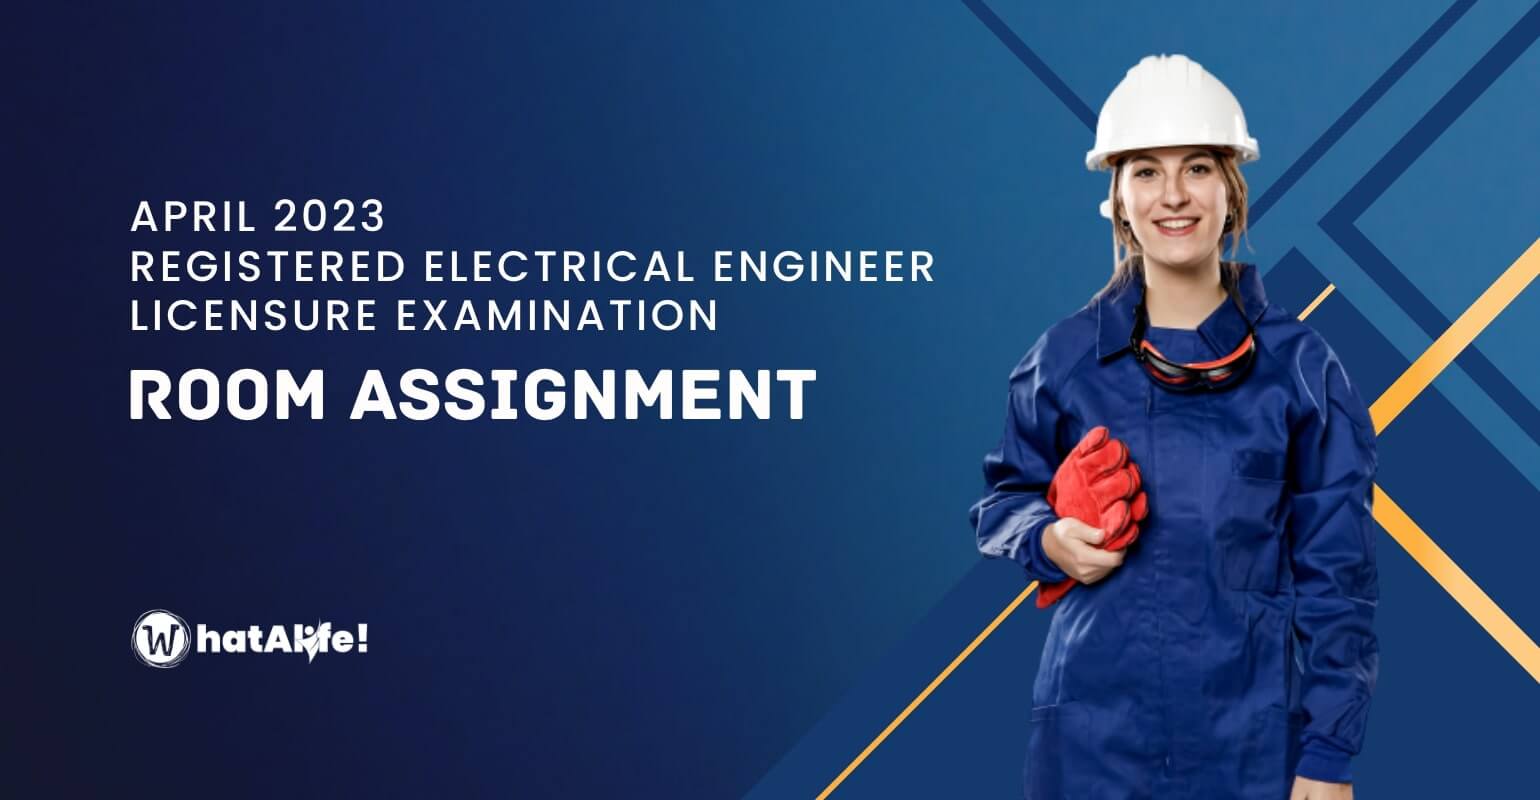 room assignment april 2023 registered electrical engineer licensure exam 1 1